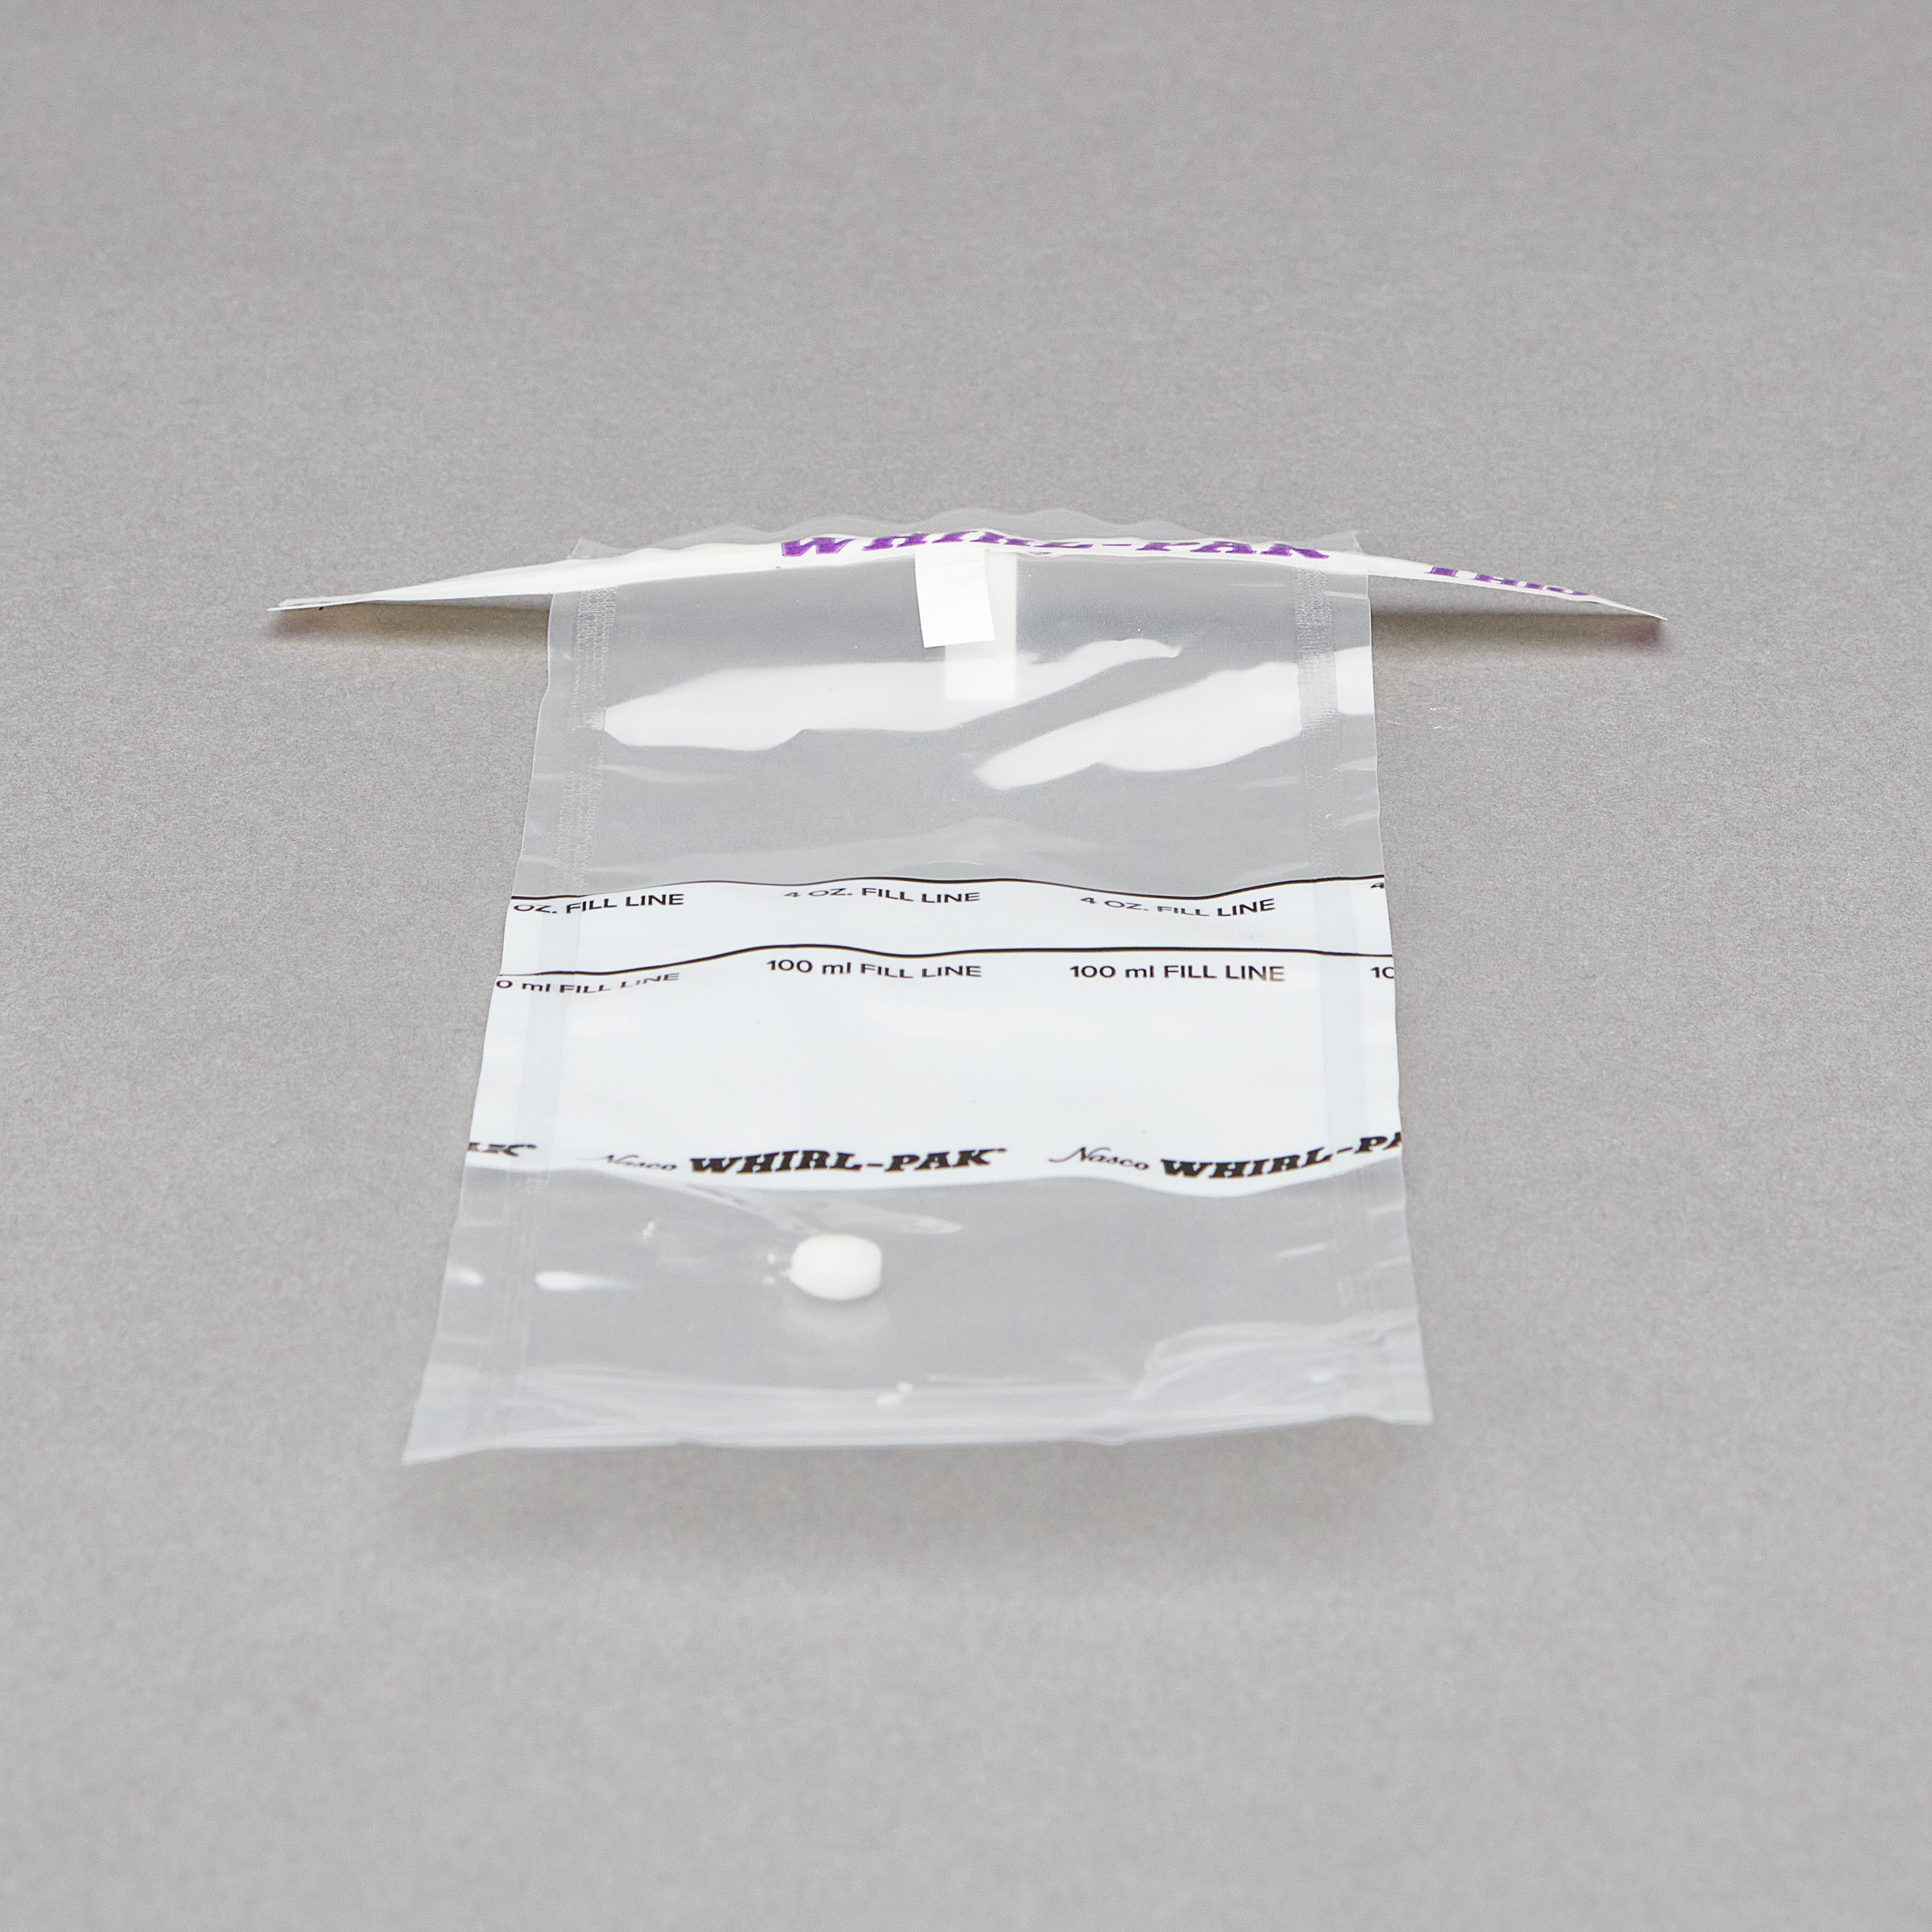 Single Thio-Bag included in Aquagenx CBT EC+TC Kits to collect 100 mL water sample